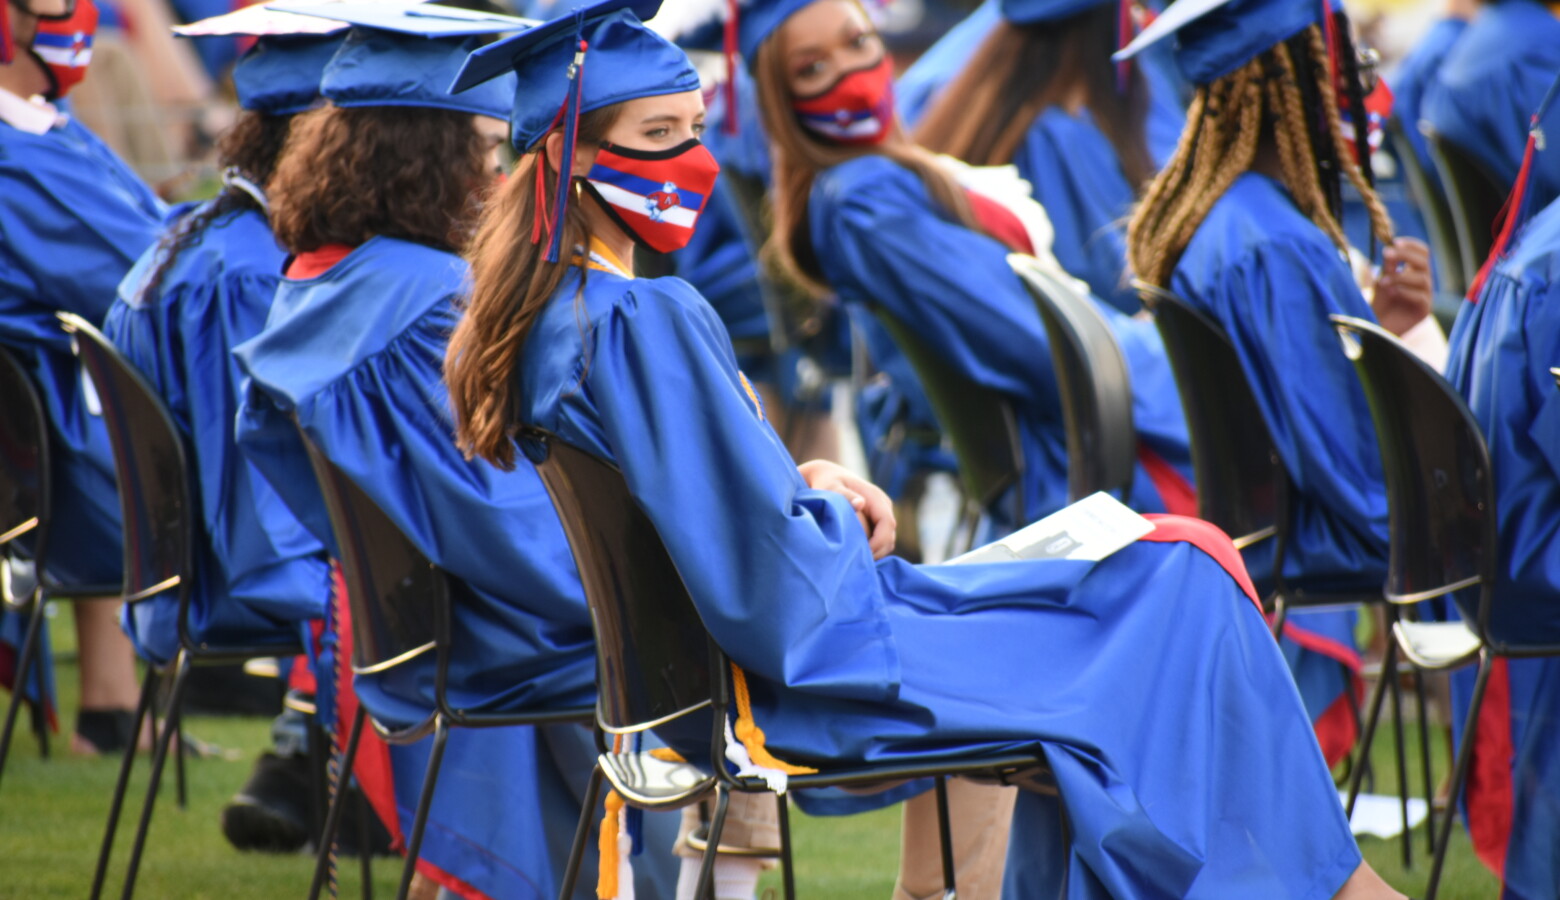 A high school graduation ceremony in South Bend, held outside due to COVID-19 safety precautions. (Justin Hicks/IPB News)